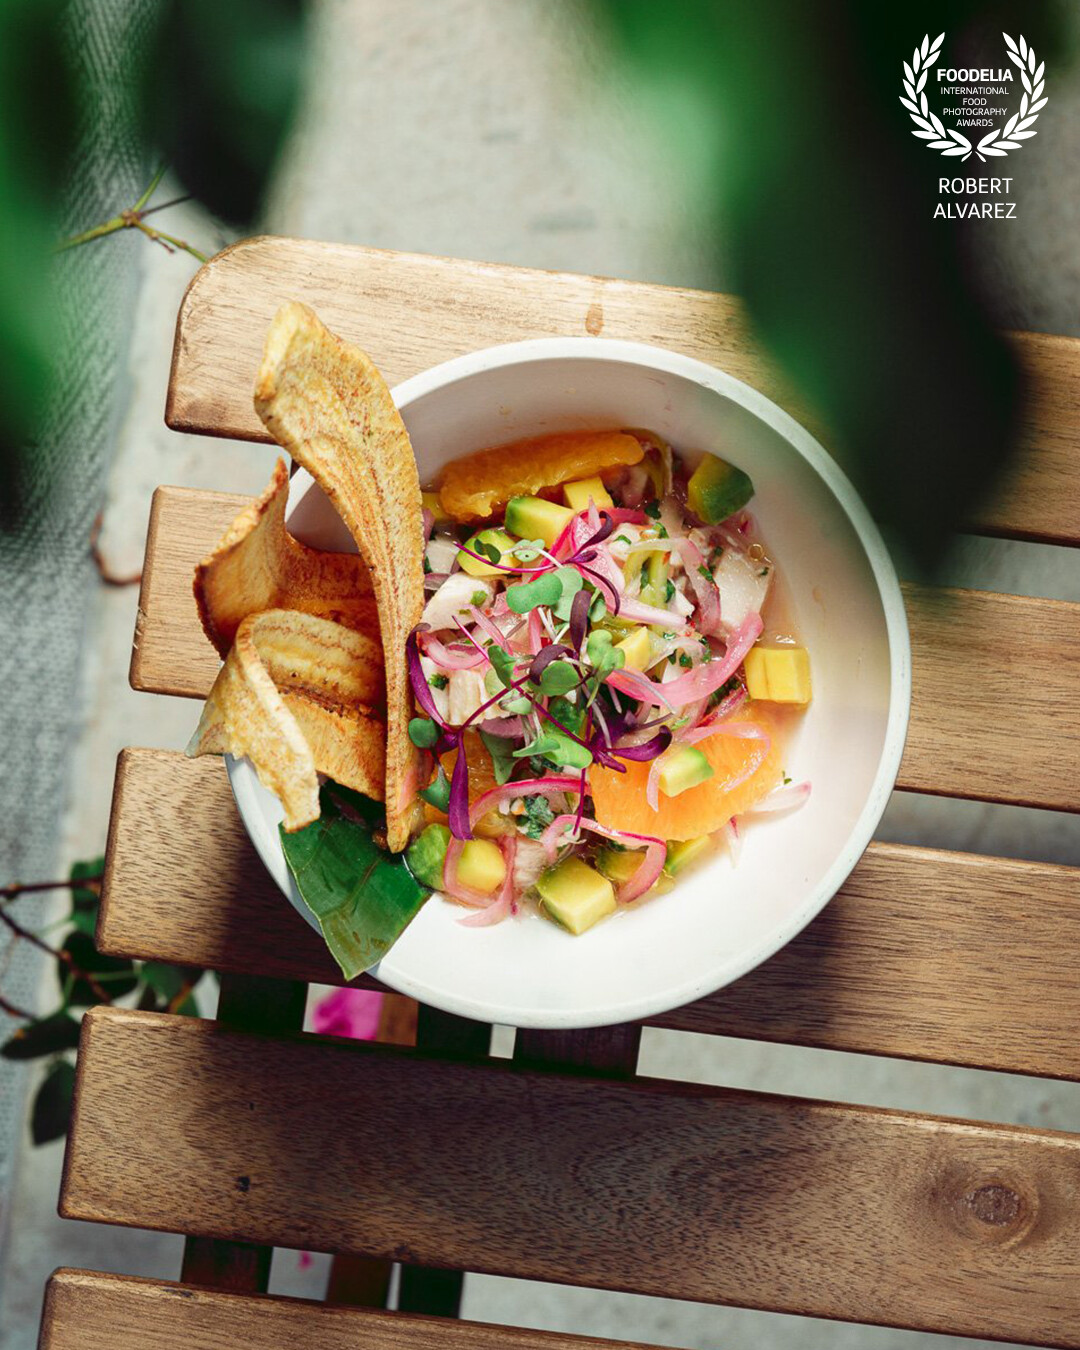 At Botanico in Calle Loiza San Juan, we tried to include nature and green in each shot, and the photoshoot came out awesome.  This ceviche was beautiful, and we added a little bit of the surroundings for the final touch.